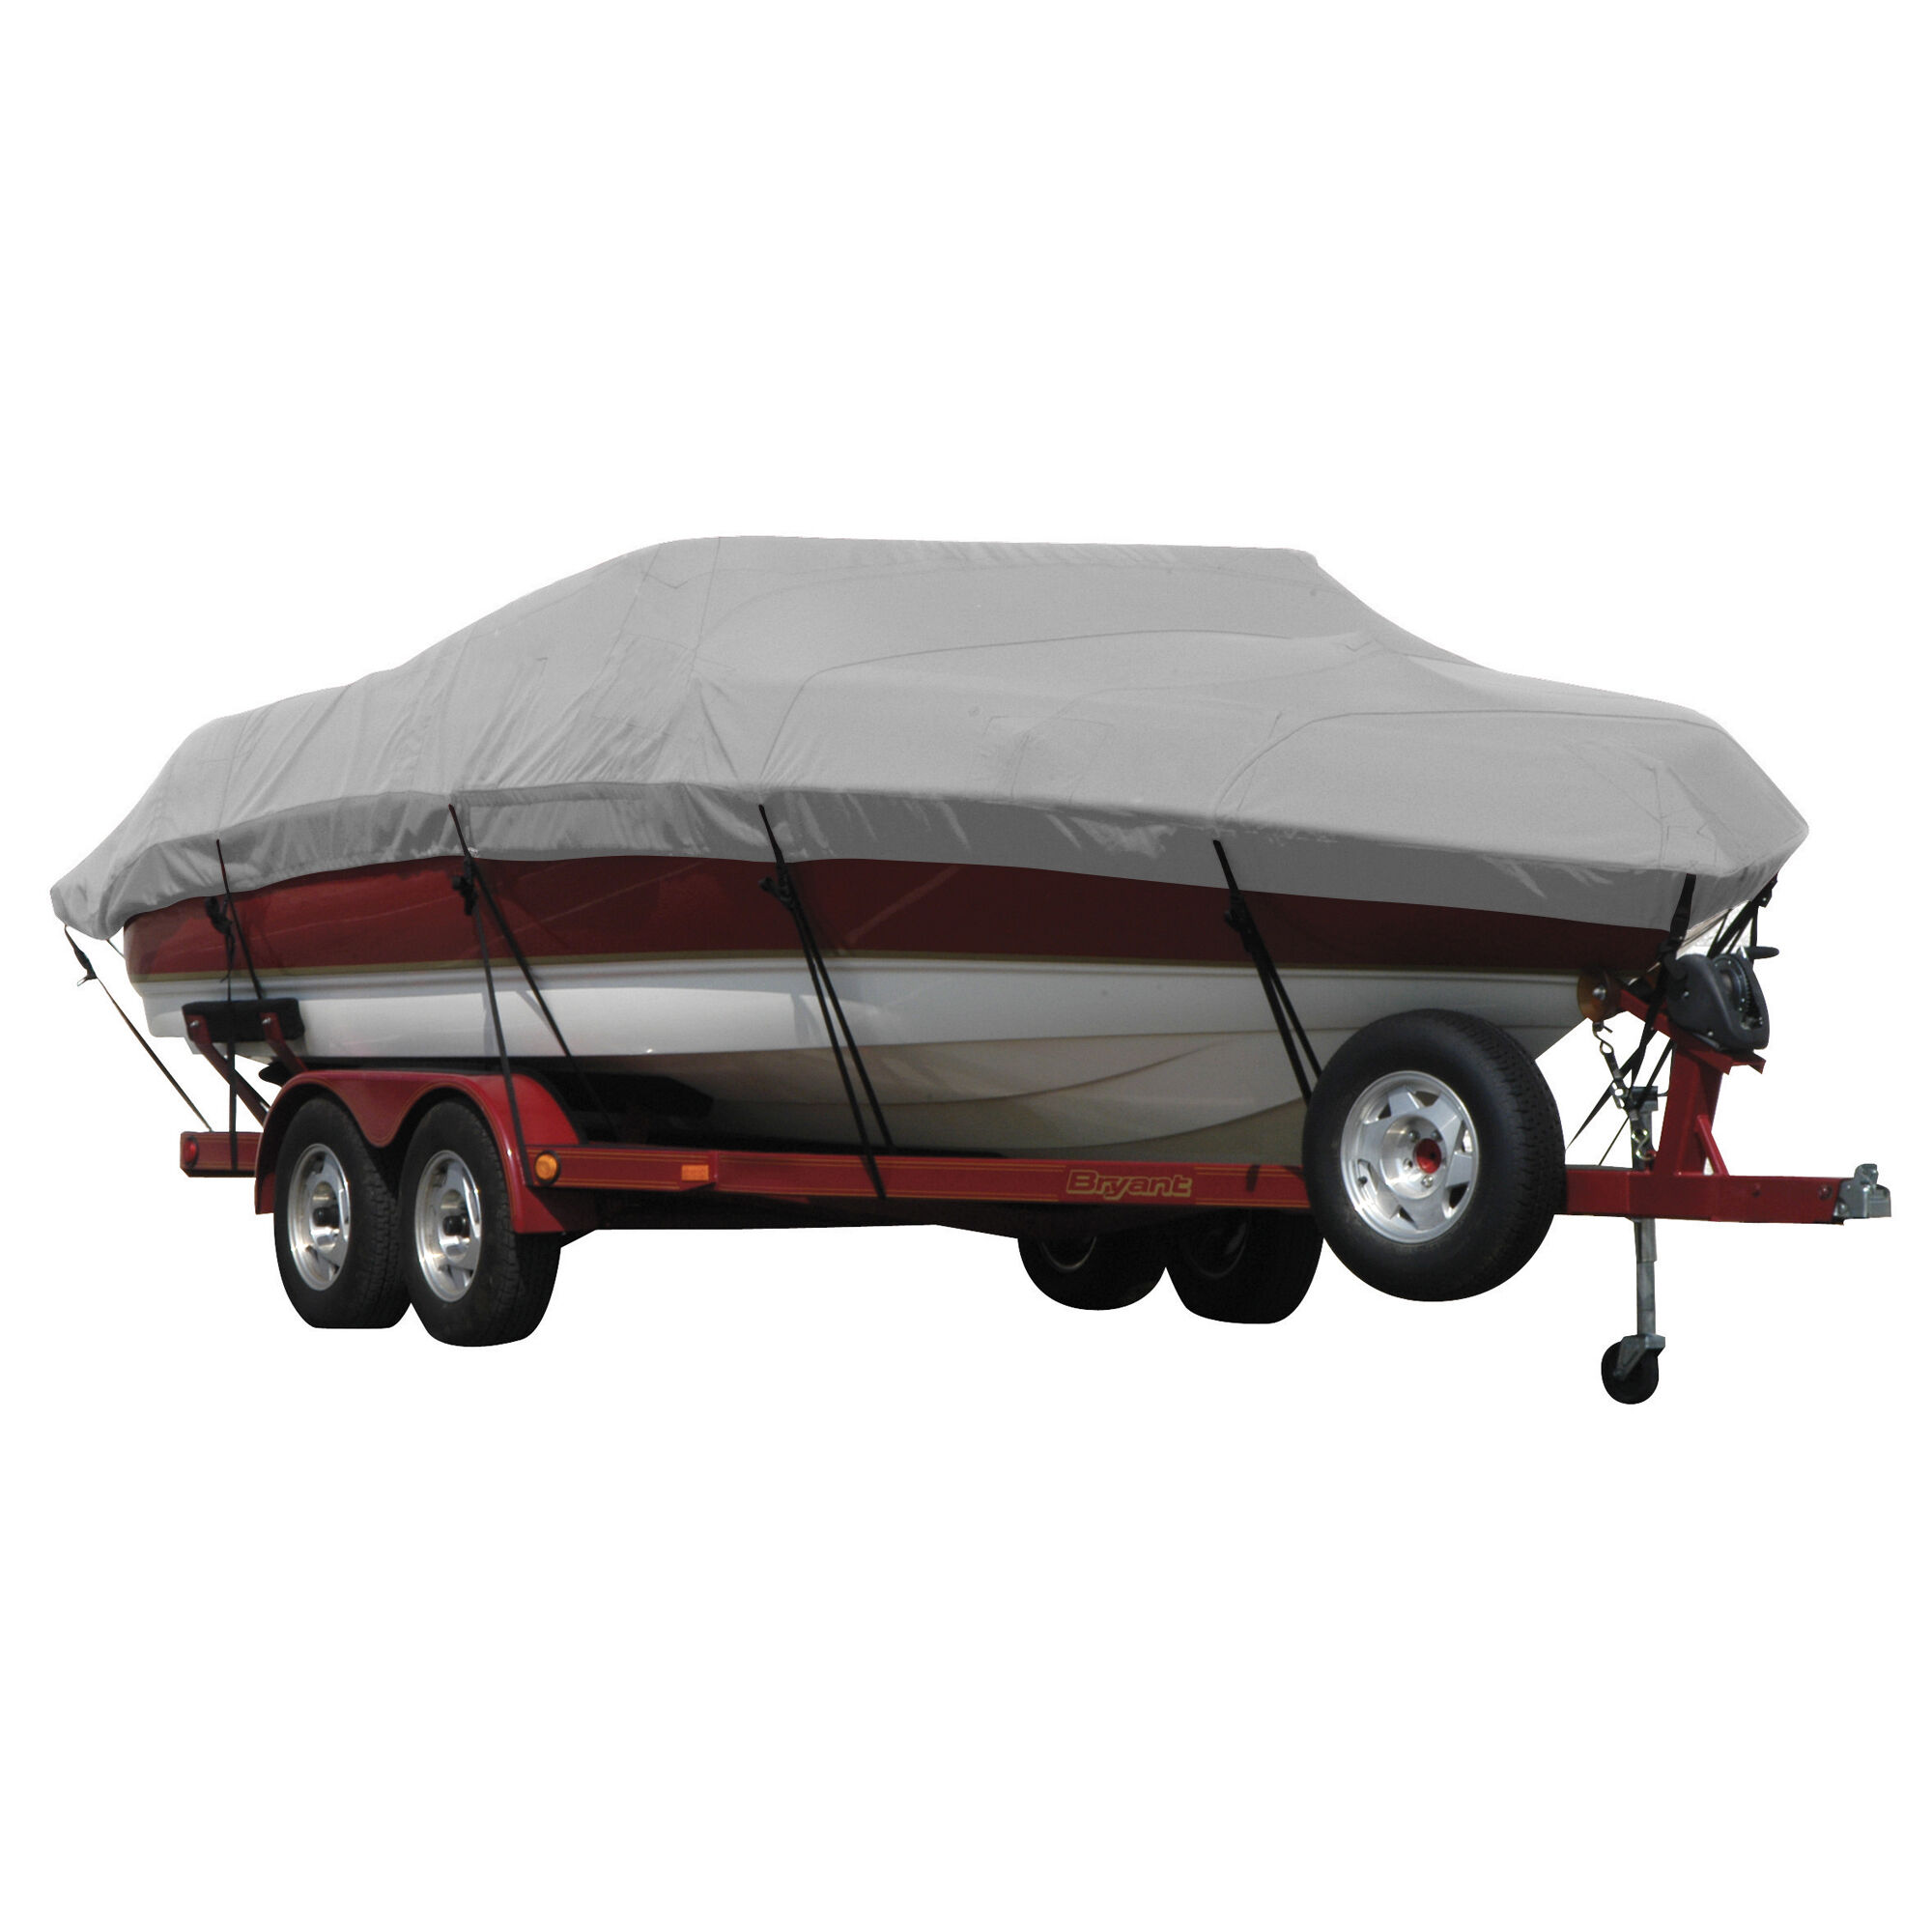 Covermate Exact Fit Sunbrella Boat Cover for Tahoe Q4 Sf Q4 Sf w/ Port Motor Guide Trolling Motor I/O. Grey